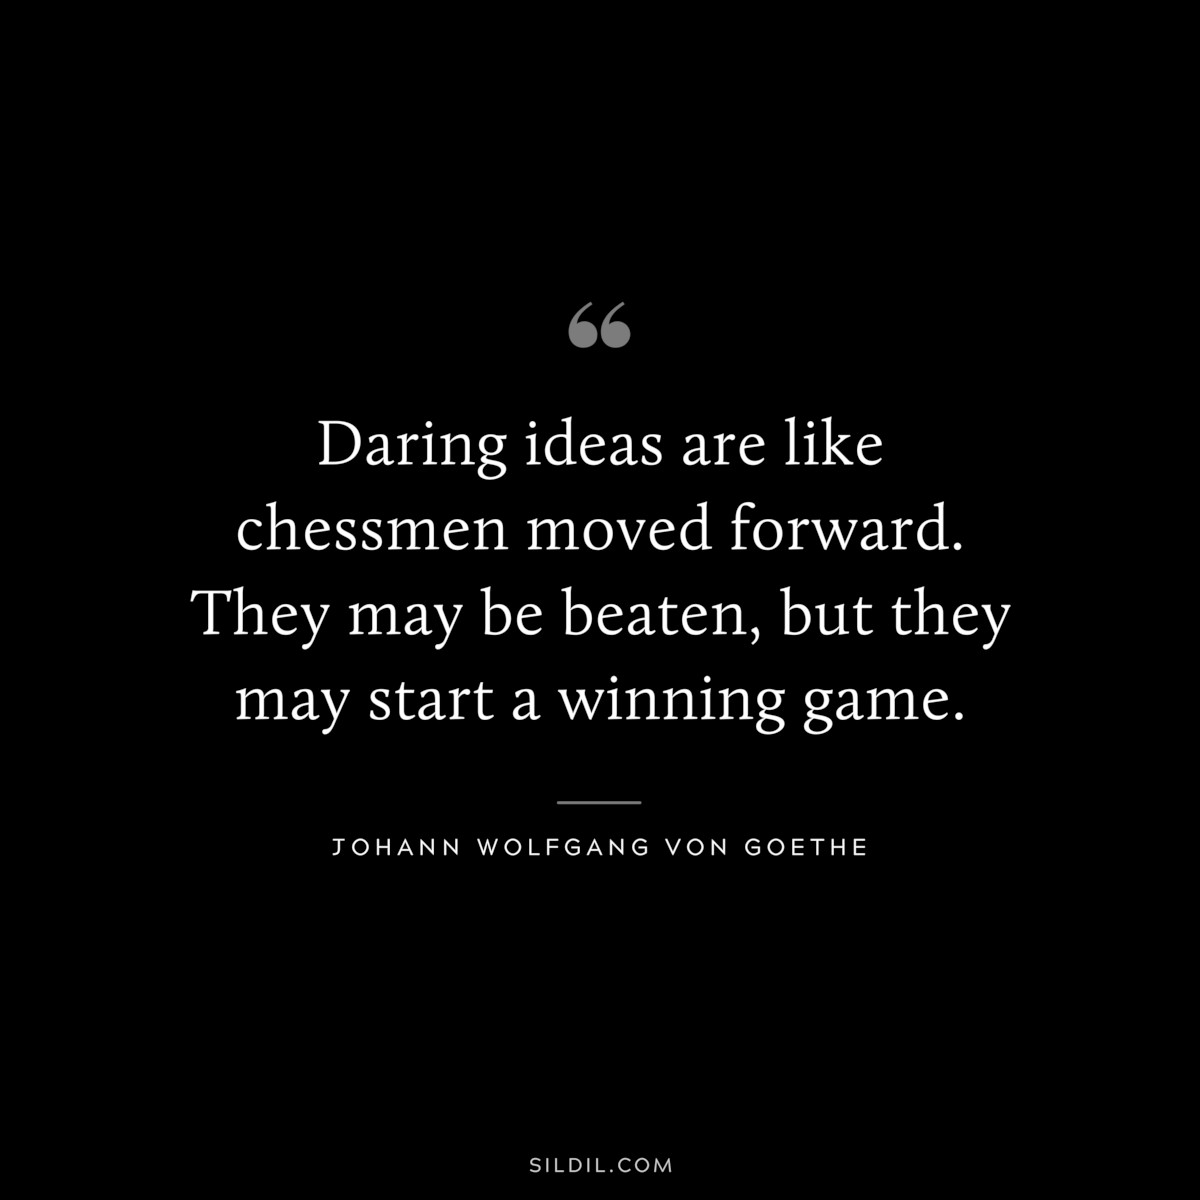 Daring ideas are like chessmen moved forward. They may be beaten, but they may start a winning game.― Johann Wolfgang von Goethe